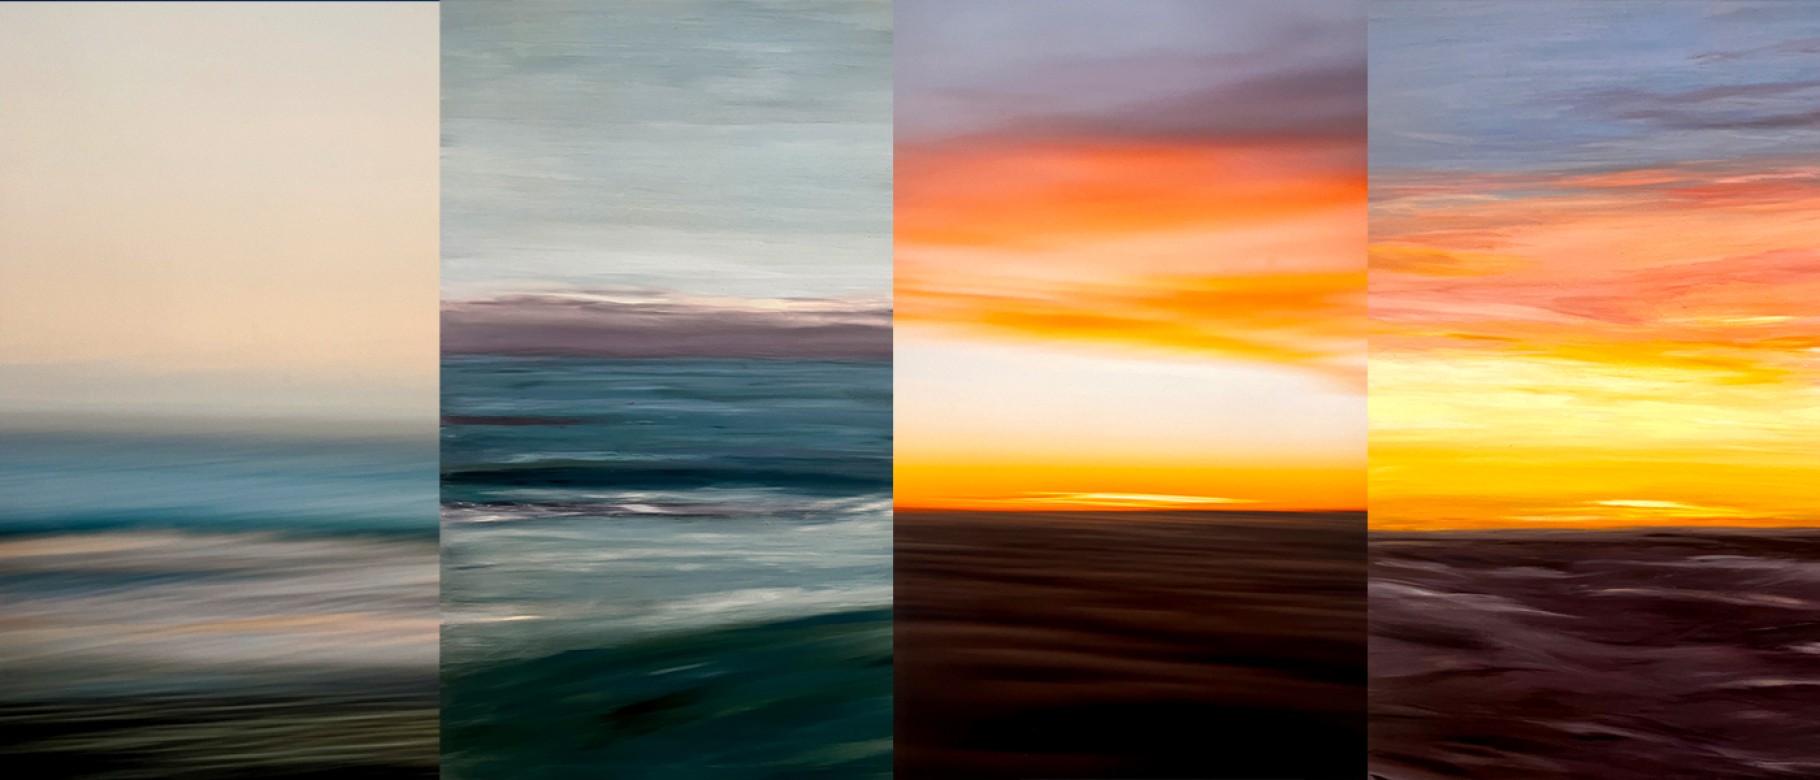 A composite image of seaside photos and paintings by mother and son Wendy and Nathaniel Kaye